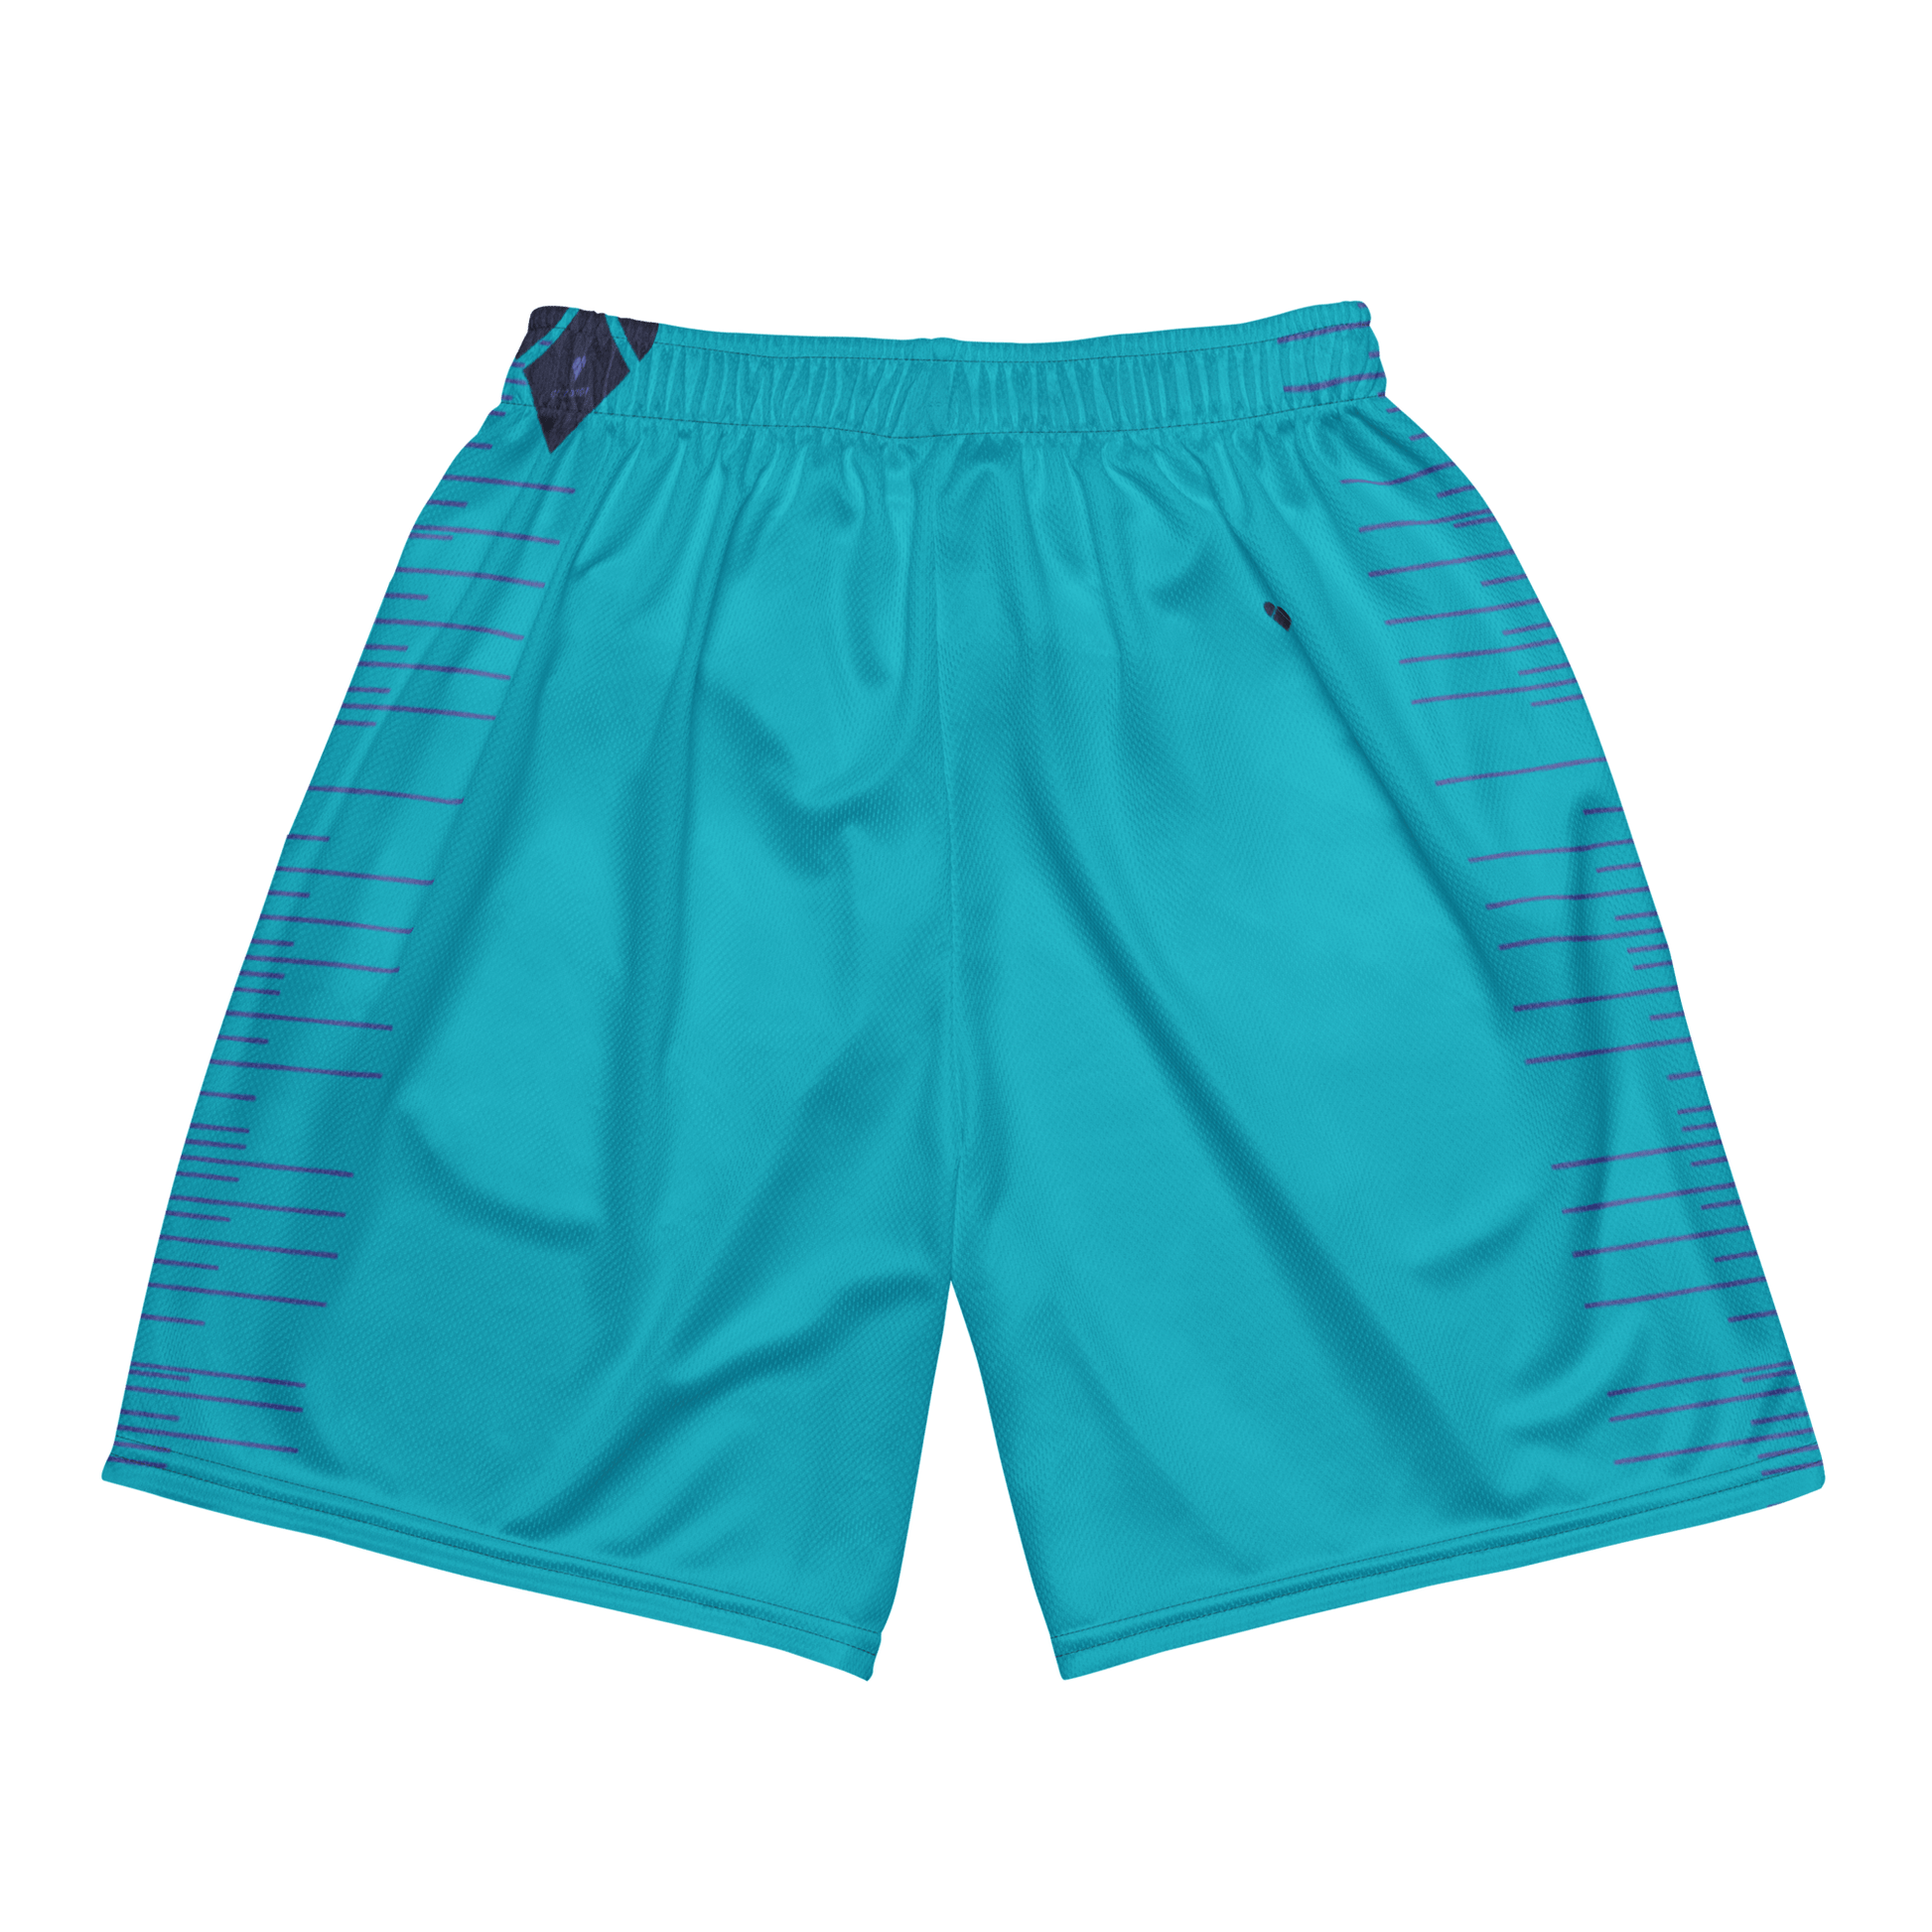 Genderless mesh shorts with vibrant turquoise and periwinkle stripes